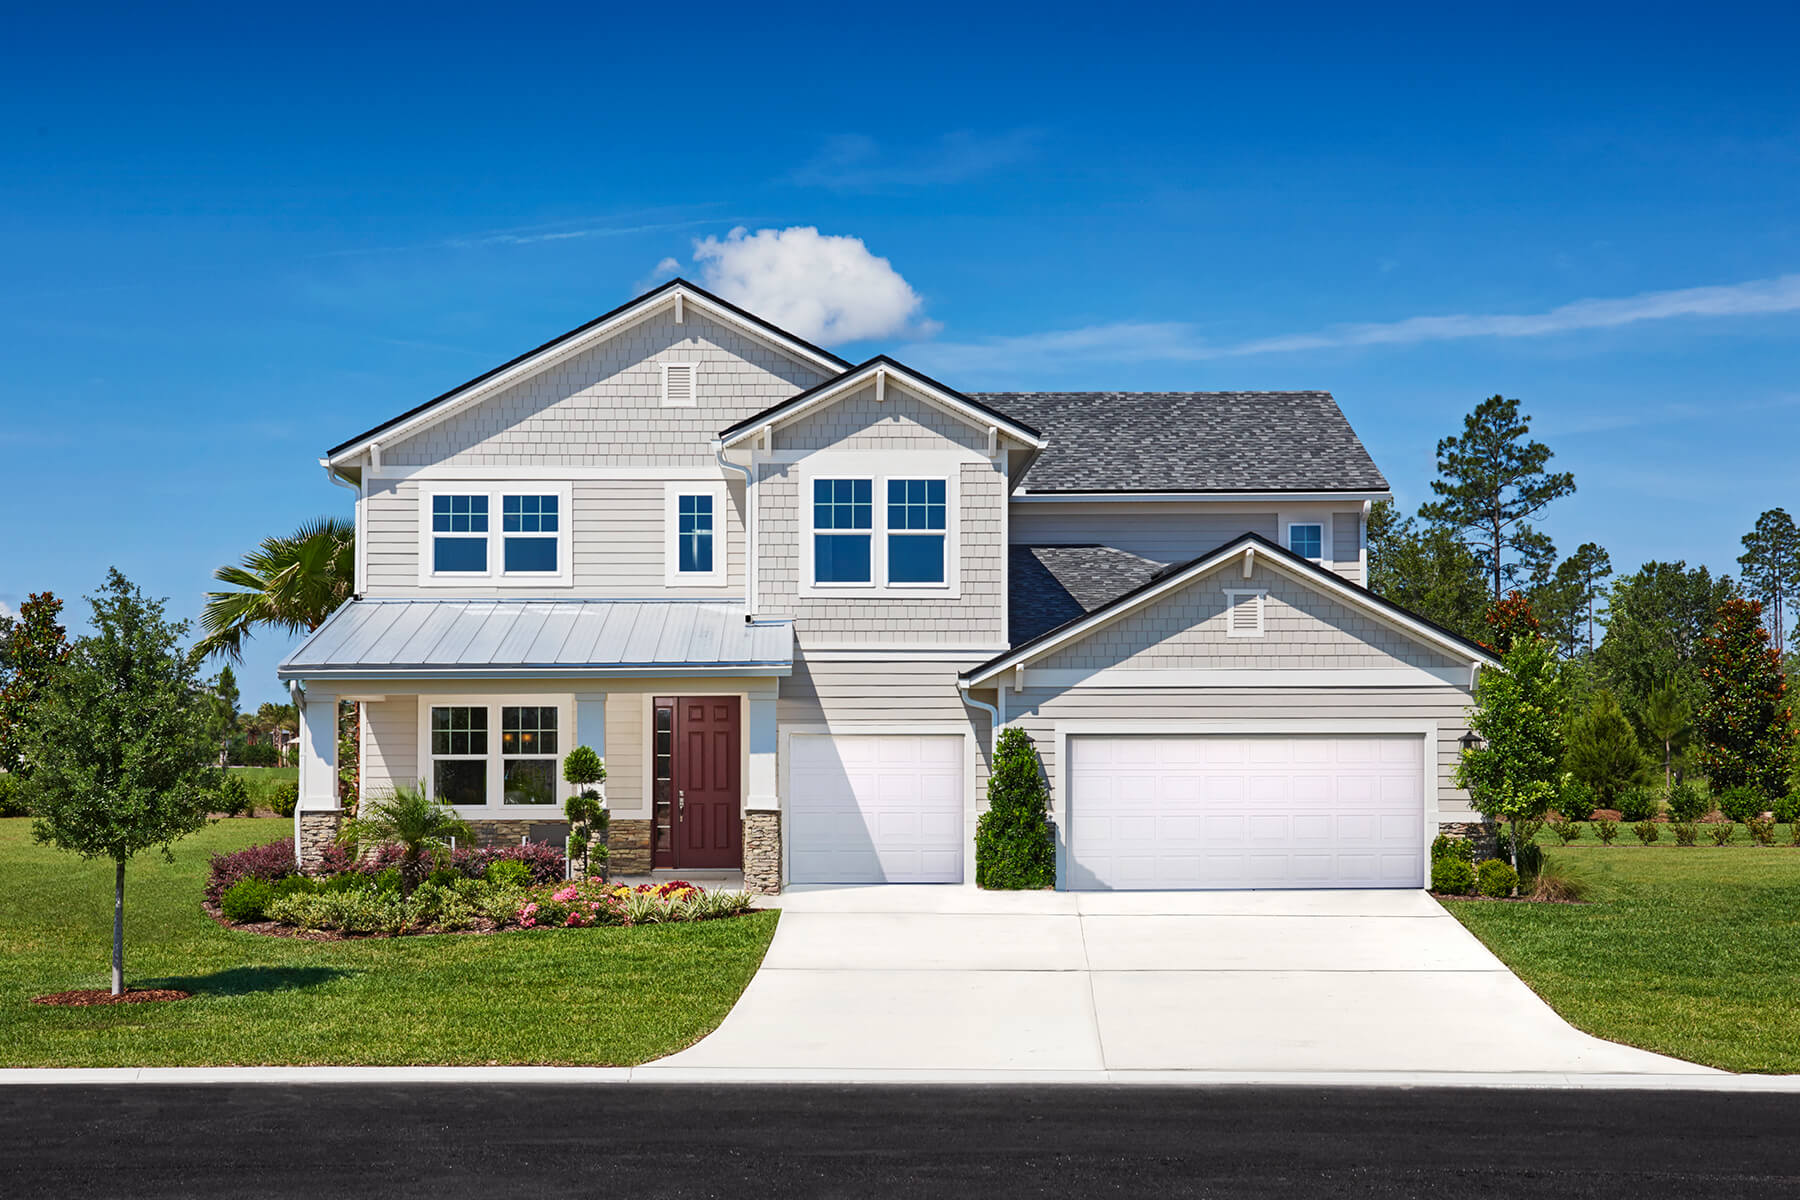 New Homes for Sale in Florida - New Construction Homes - Pulte